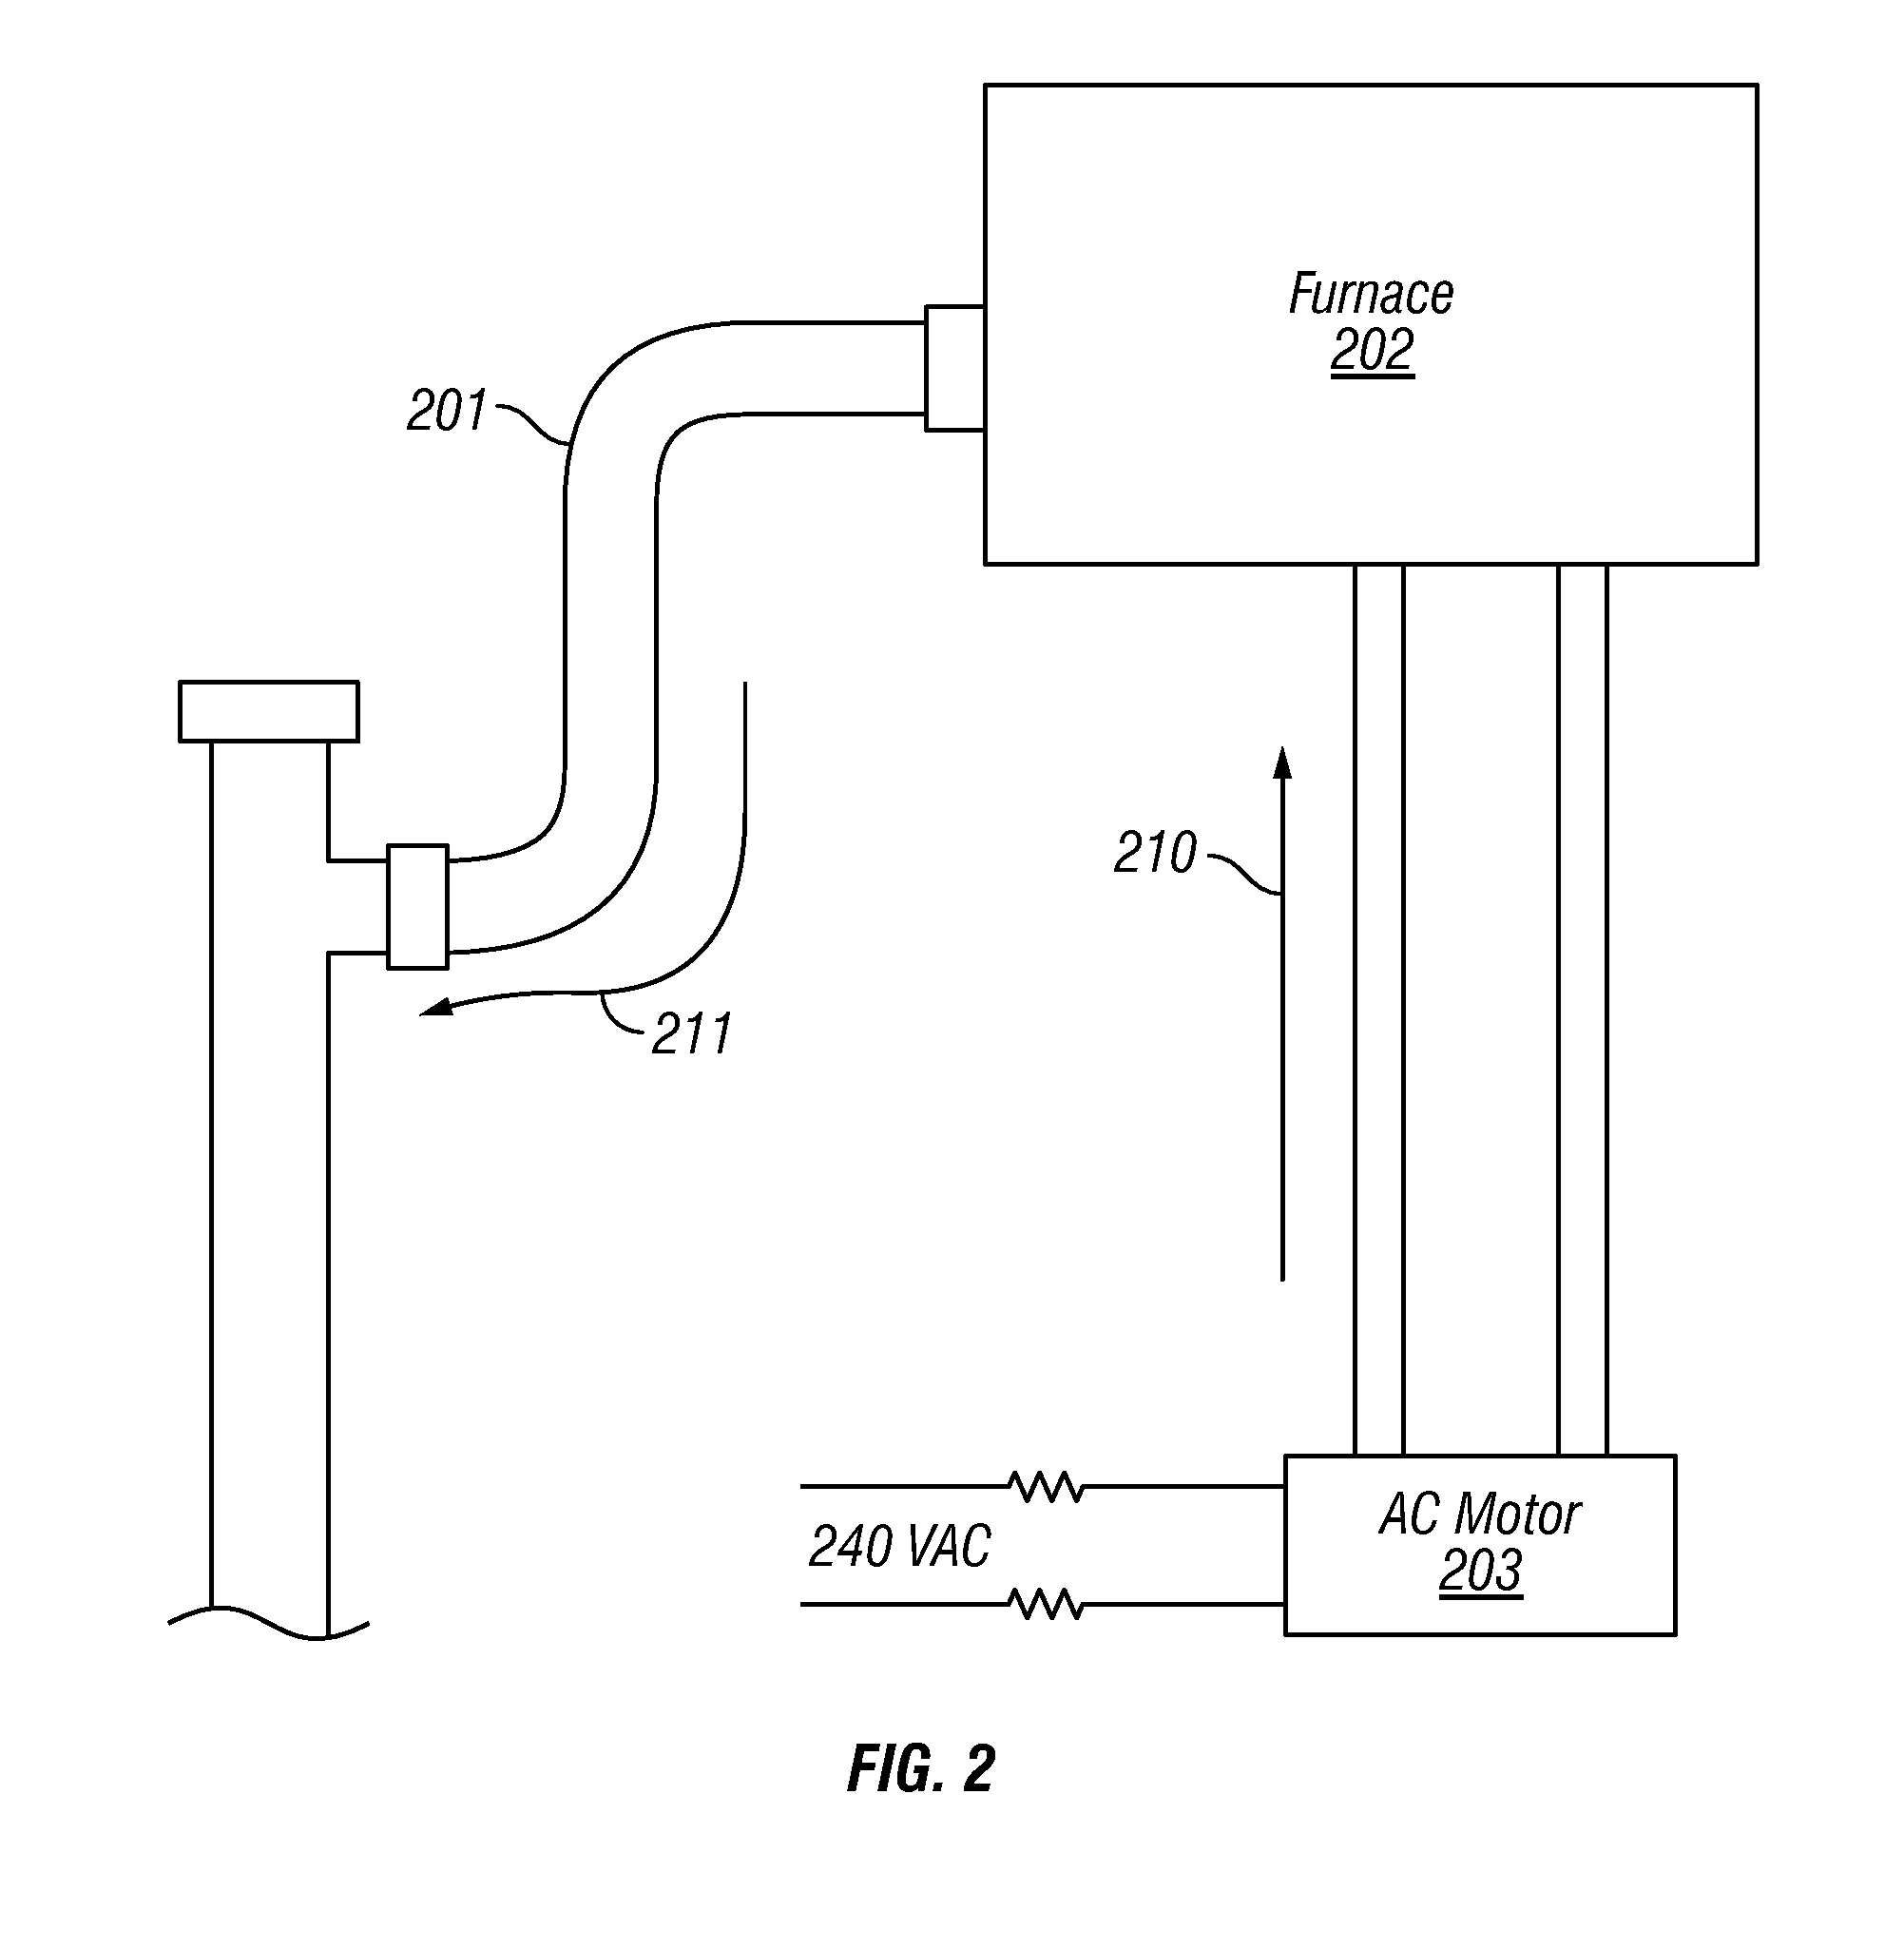 Apparatus and method for detection and cessation of unintedned gas flow